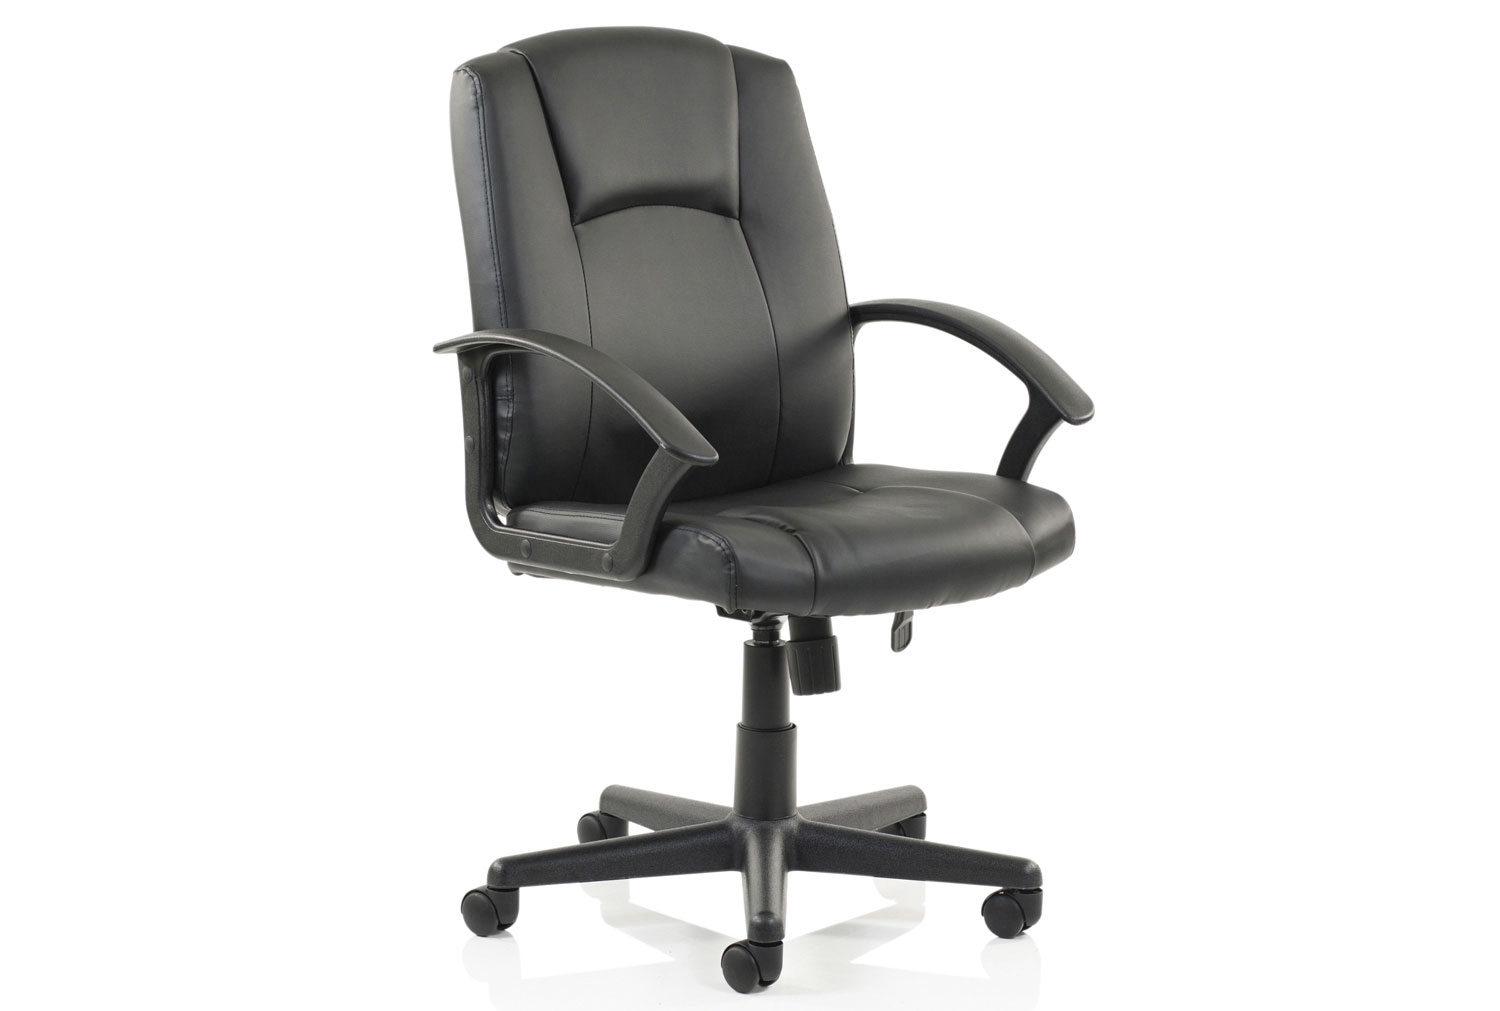 Alcantara Executive Leather Office Chair, Express Delivery